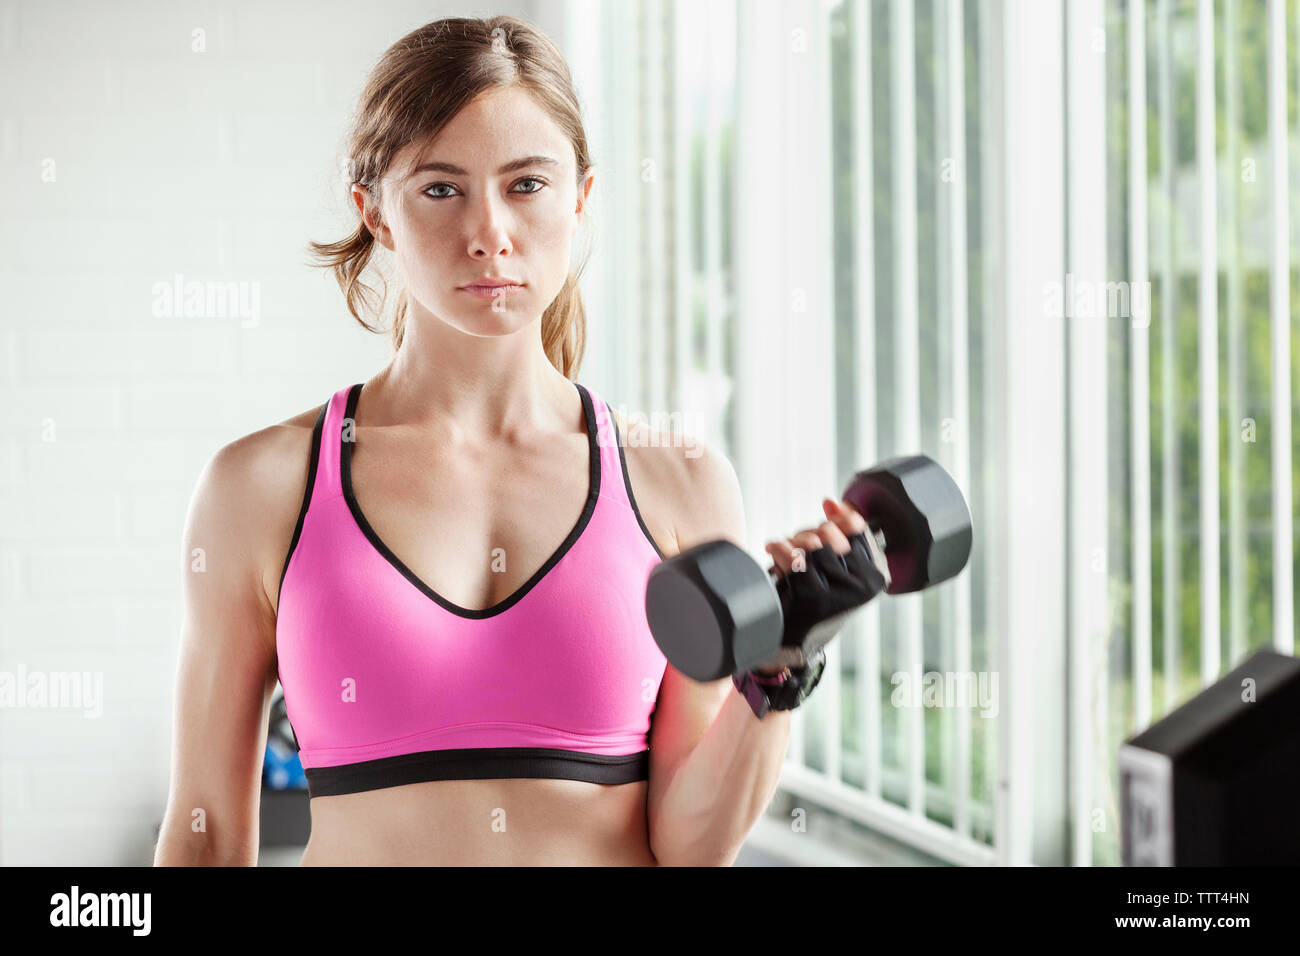 Portrait of woman lifting dumbbell at gym Banque D'Images